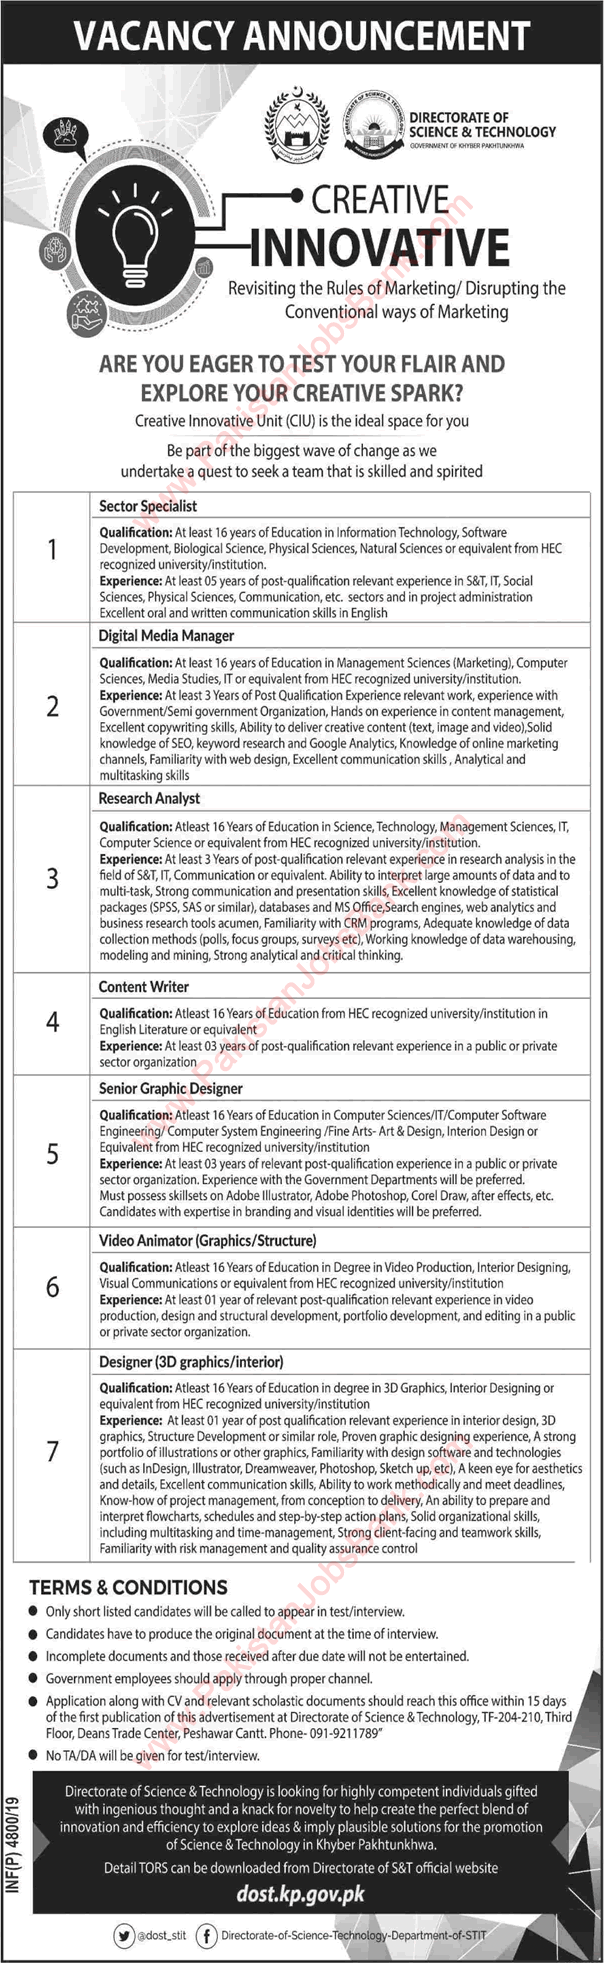 Directorate of Science and Technology KPK Jobs November 2019 Graphic Designers & Others Latest